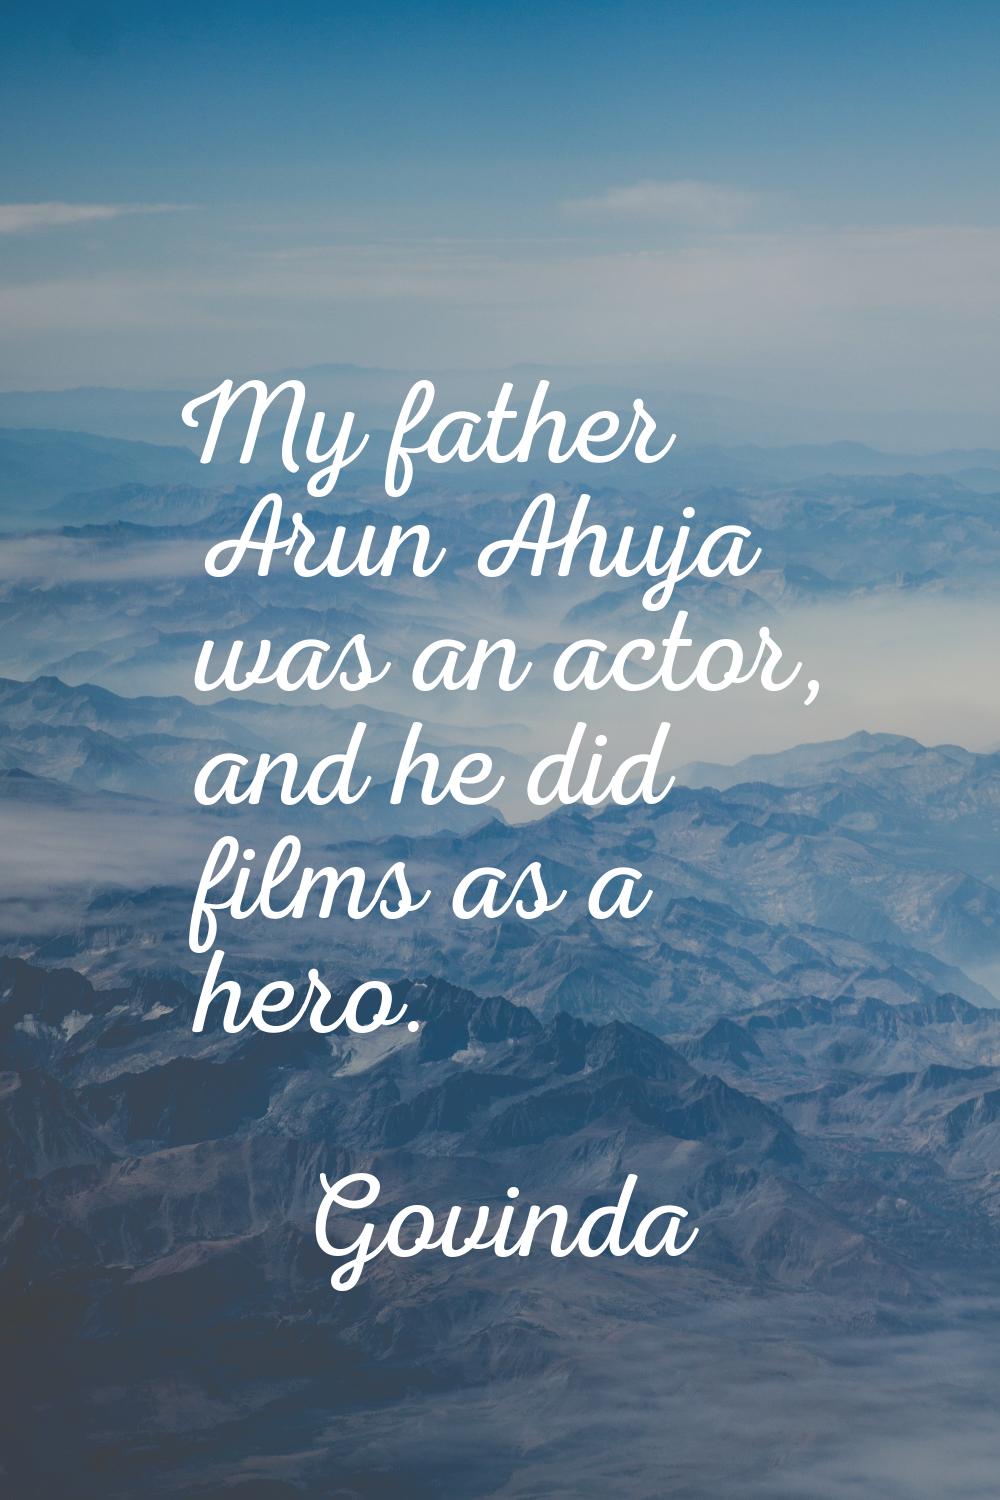 My father Arun Ahuja was an actor, and he did films as a hero.